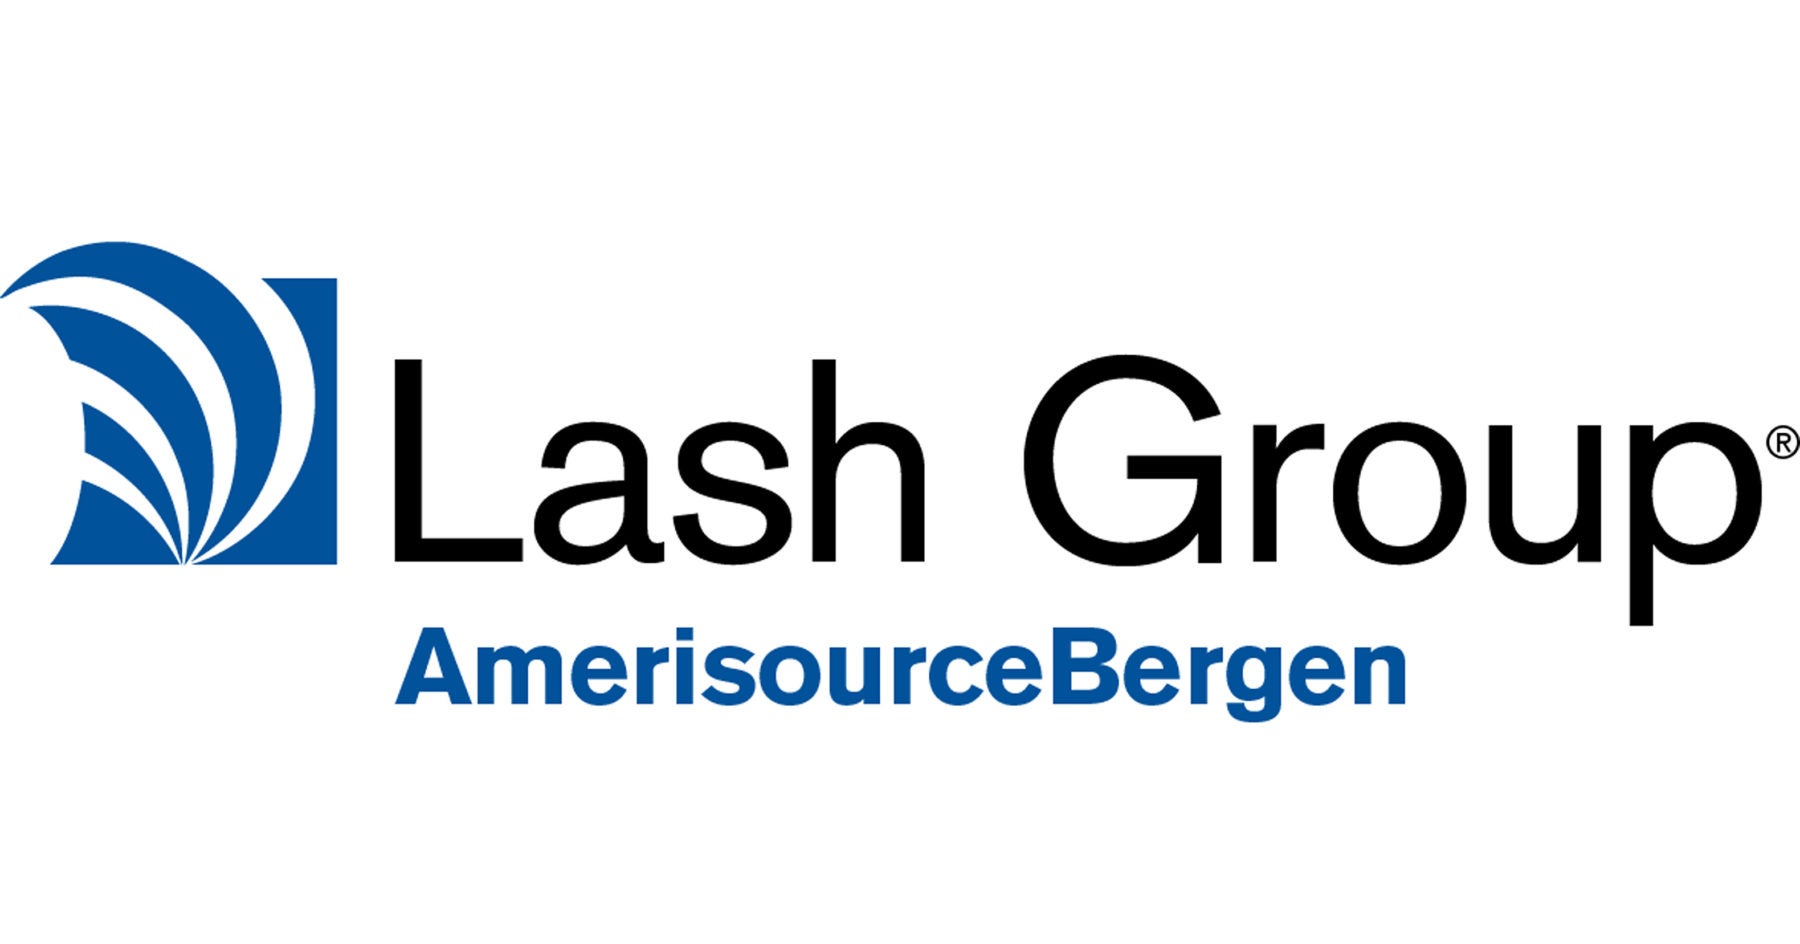 The Lash Group